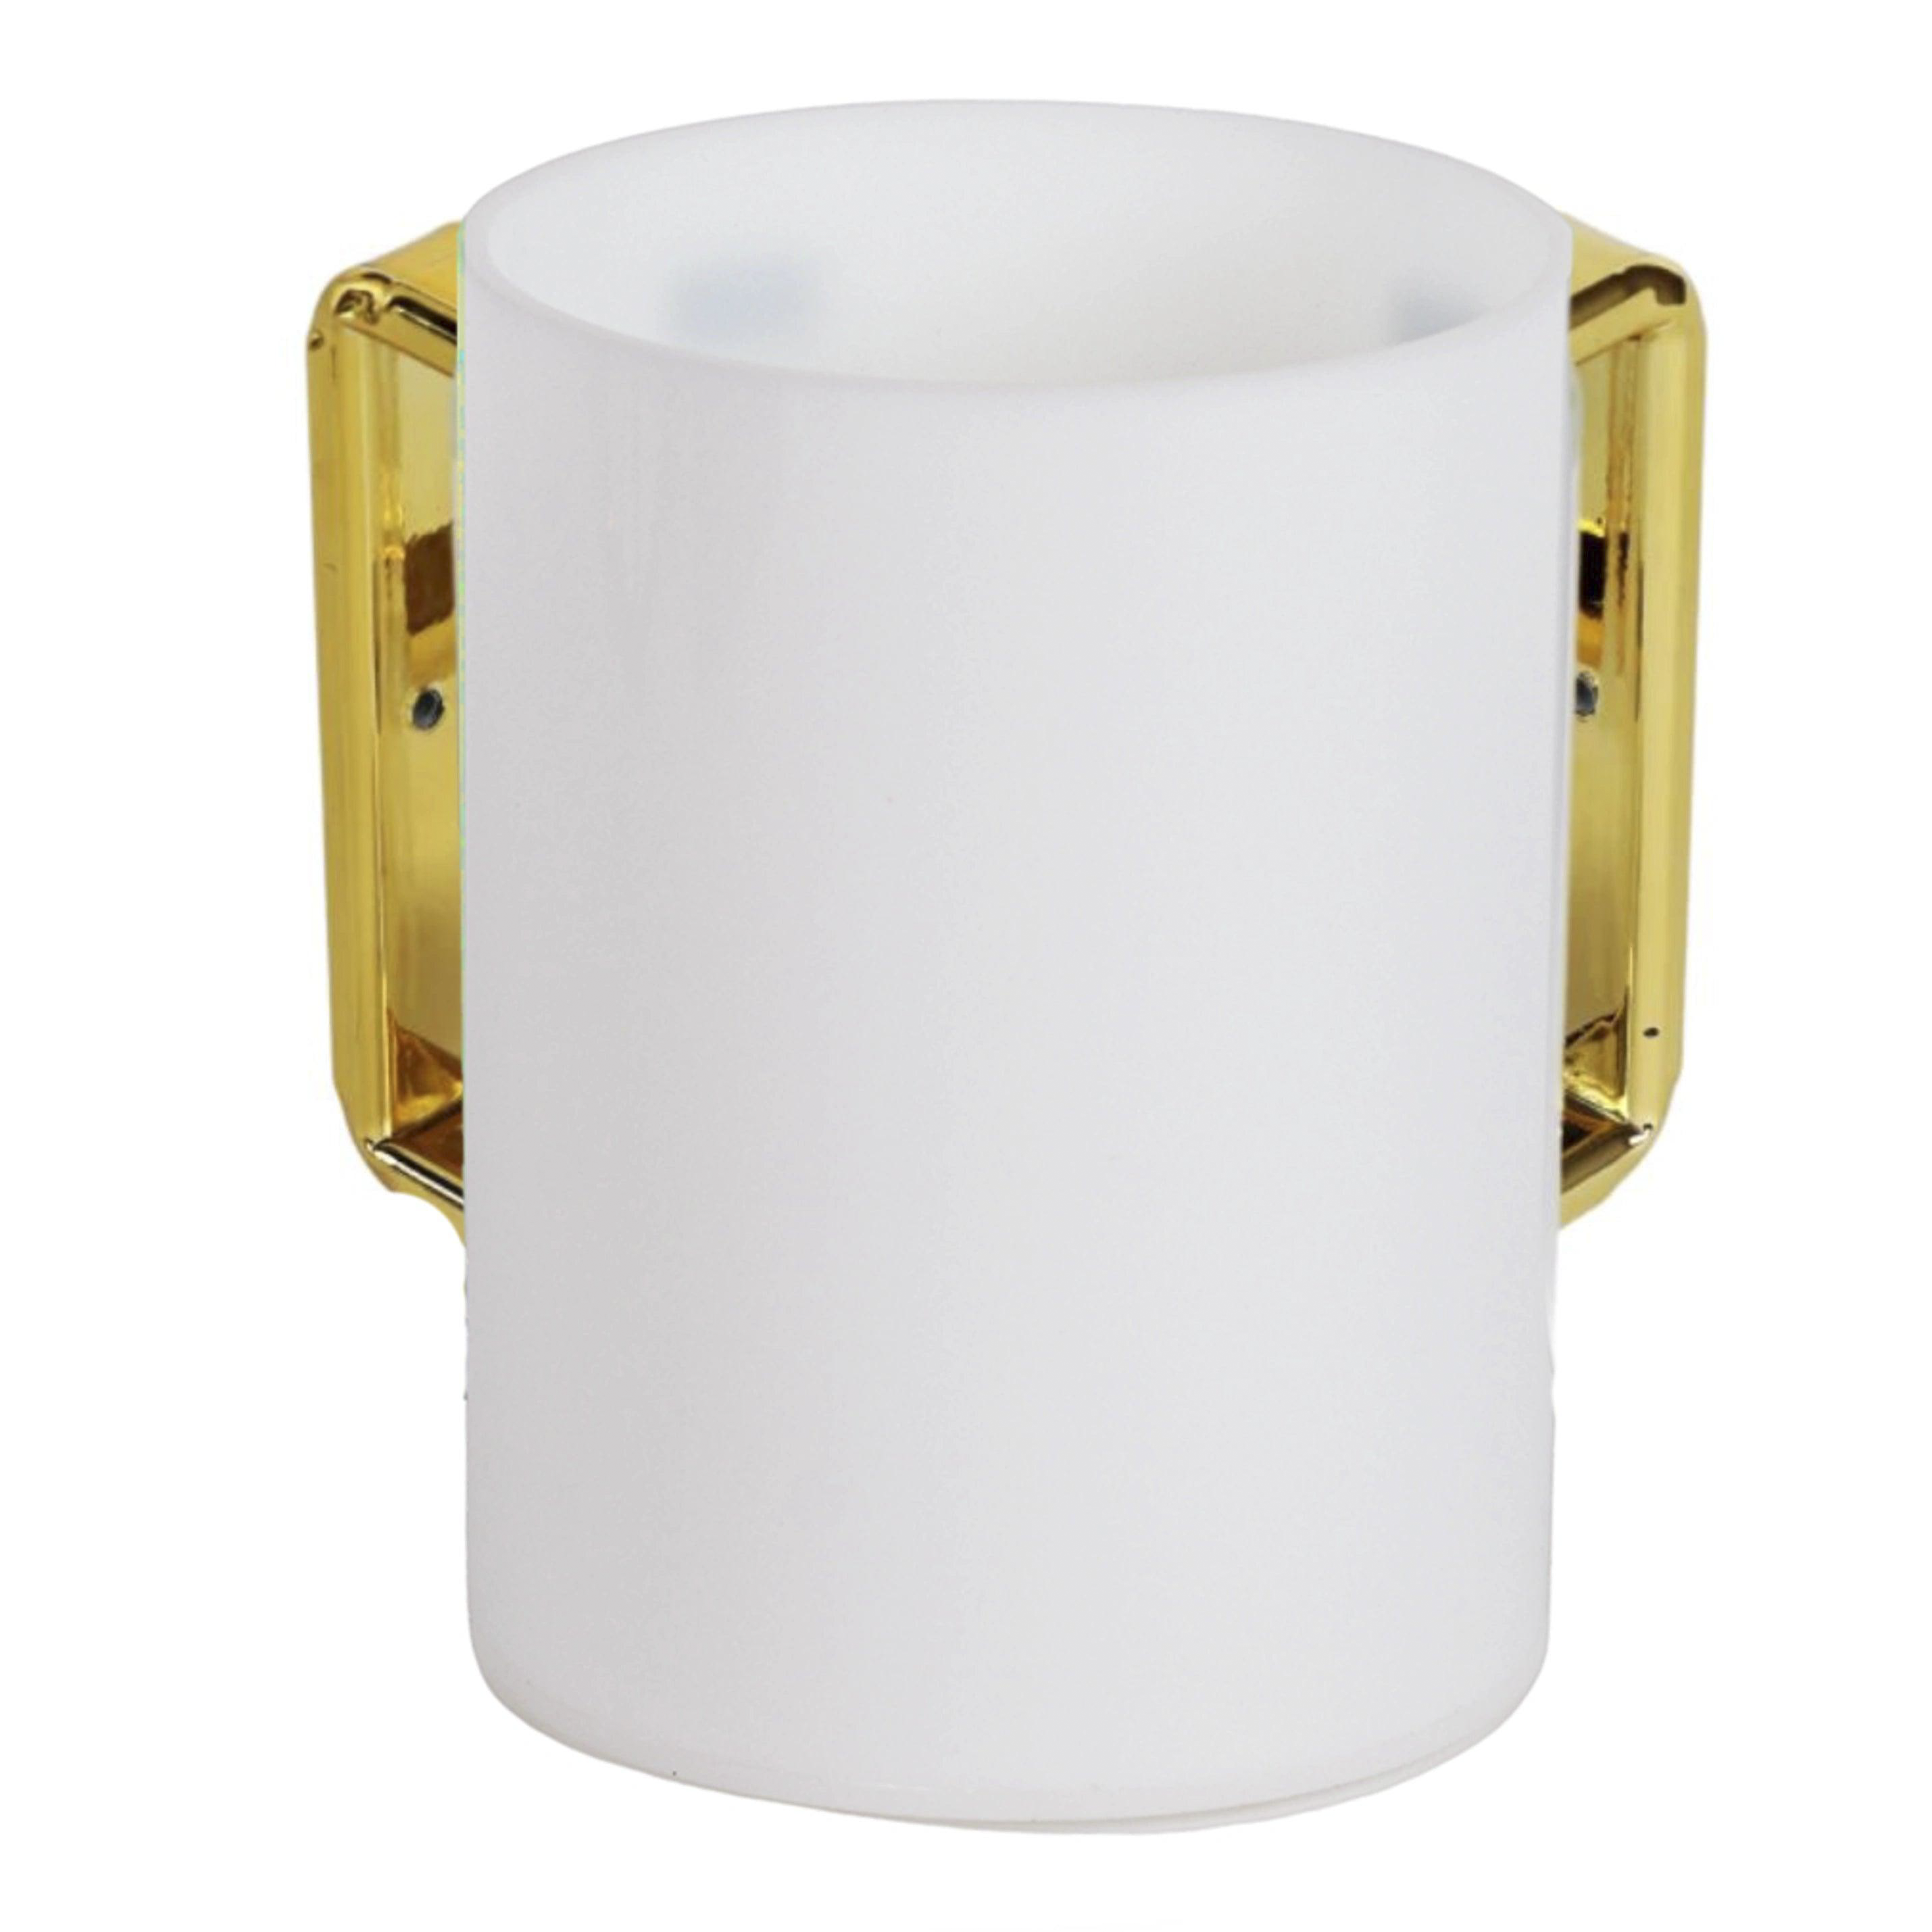 Acrylic Washing Cup White With Gold Handles